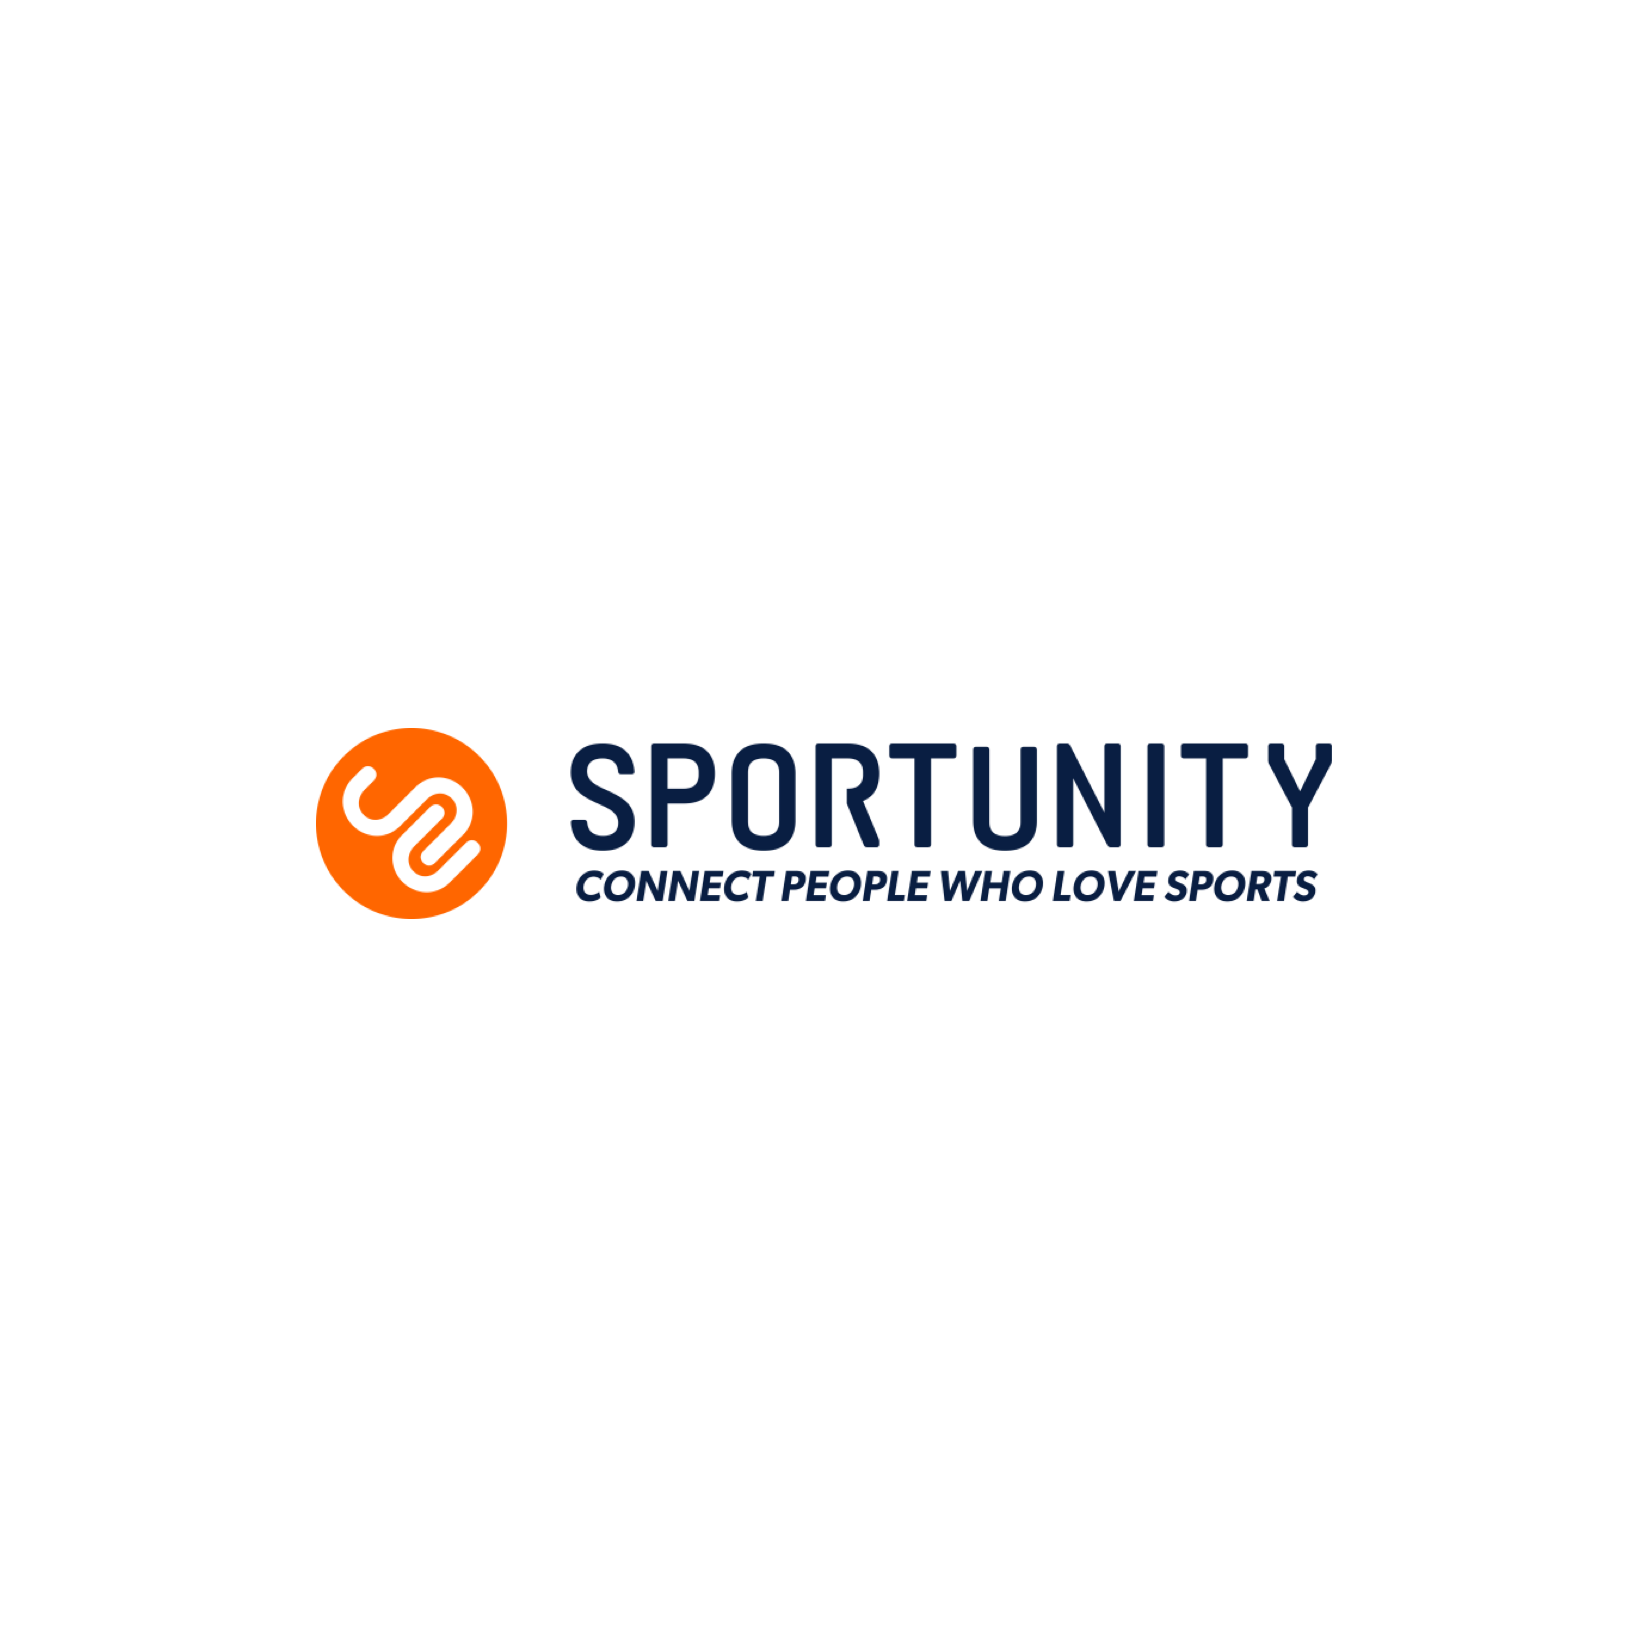 Sportunity | Connect people who love sports!